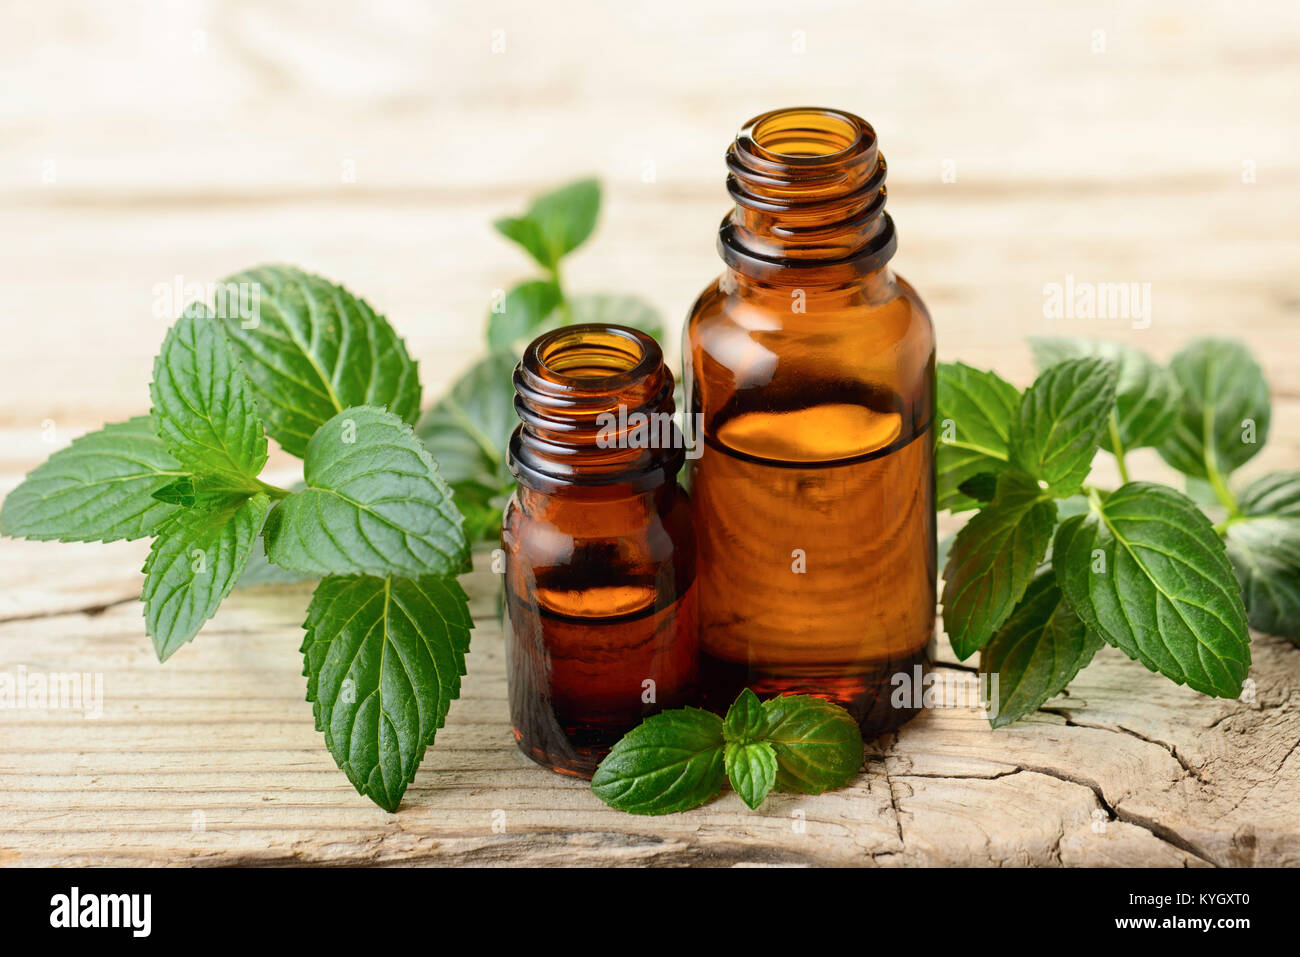 Peppermint essential oil and leaves on the wooden board Stock Photo